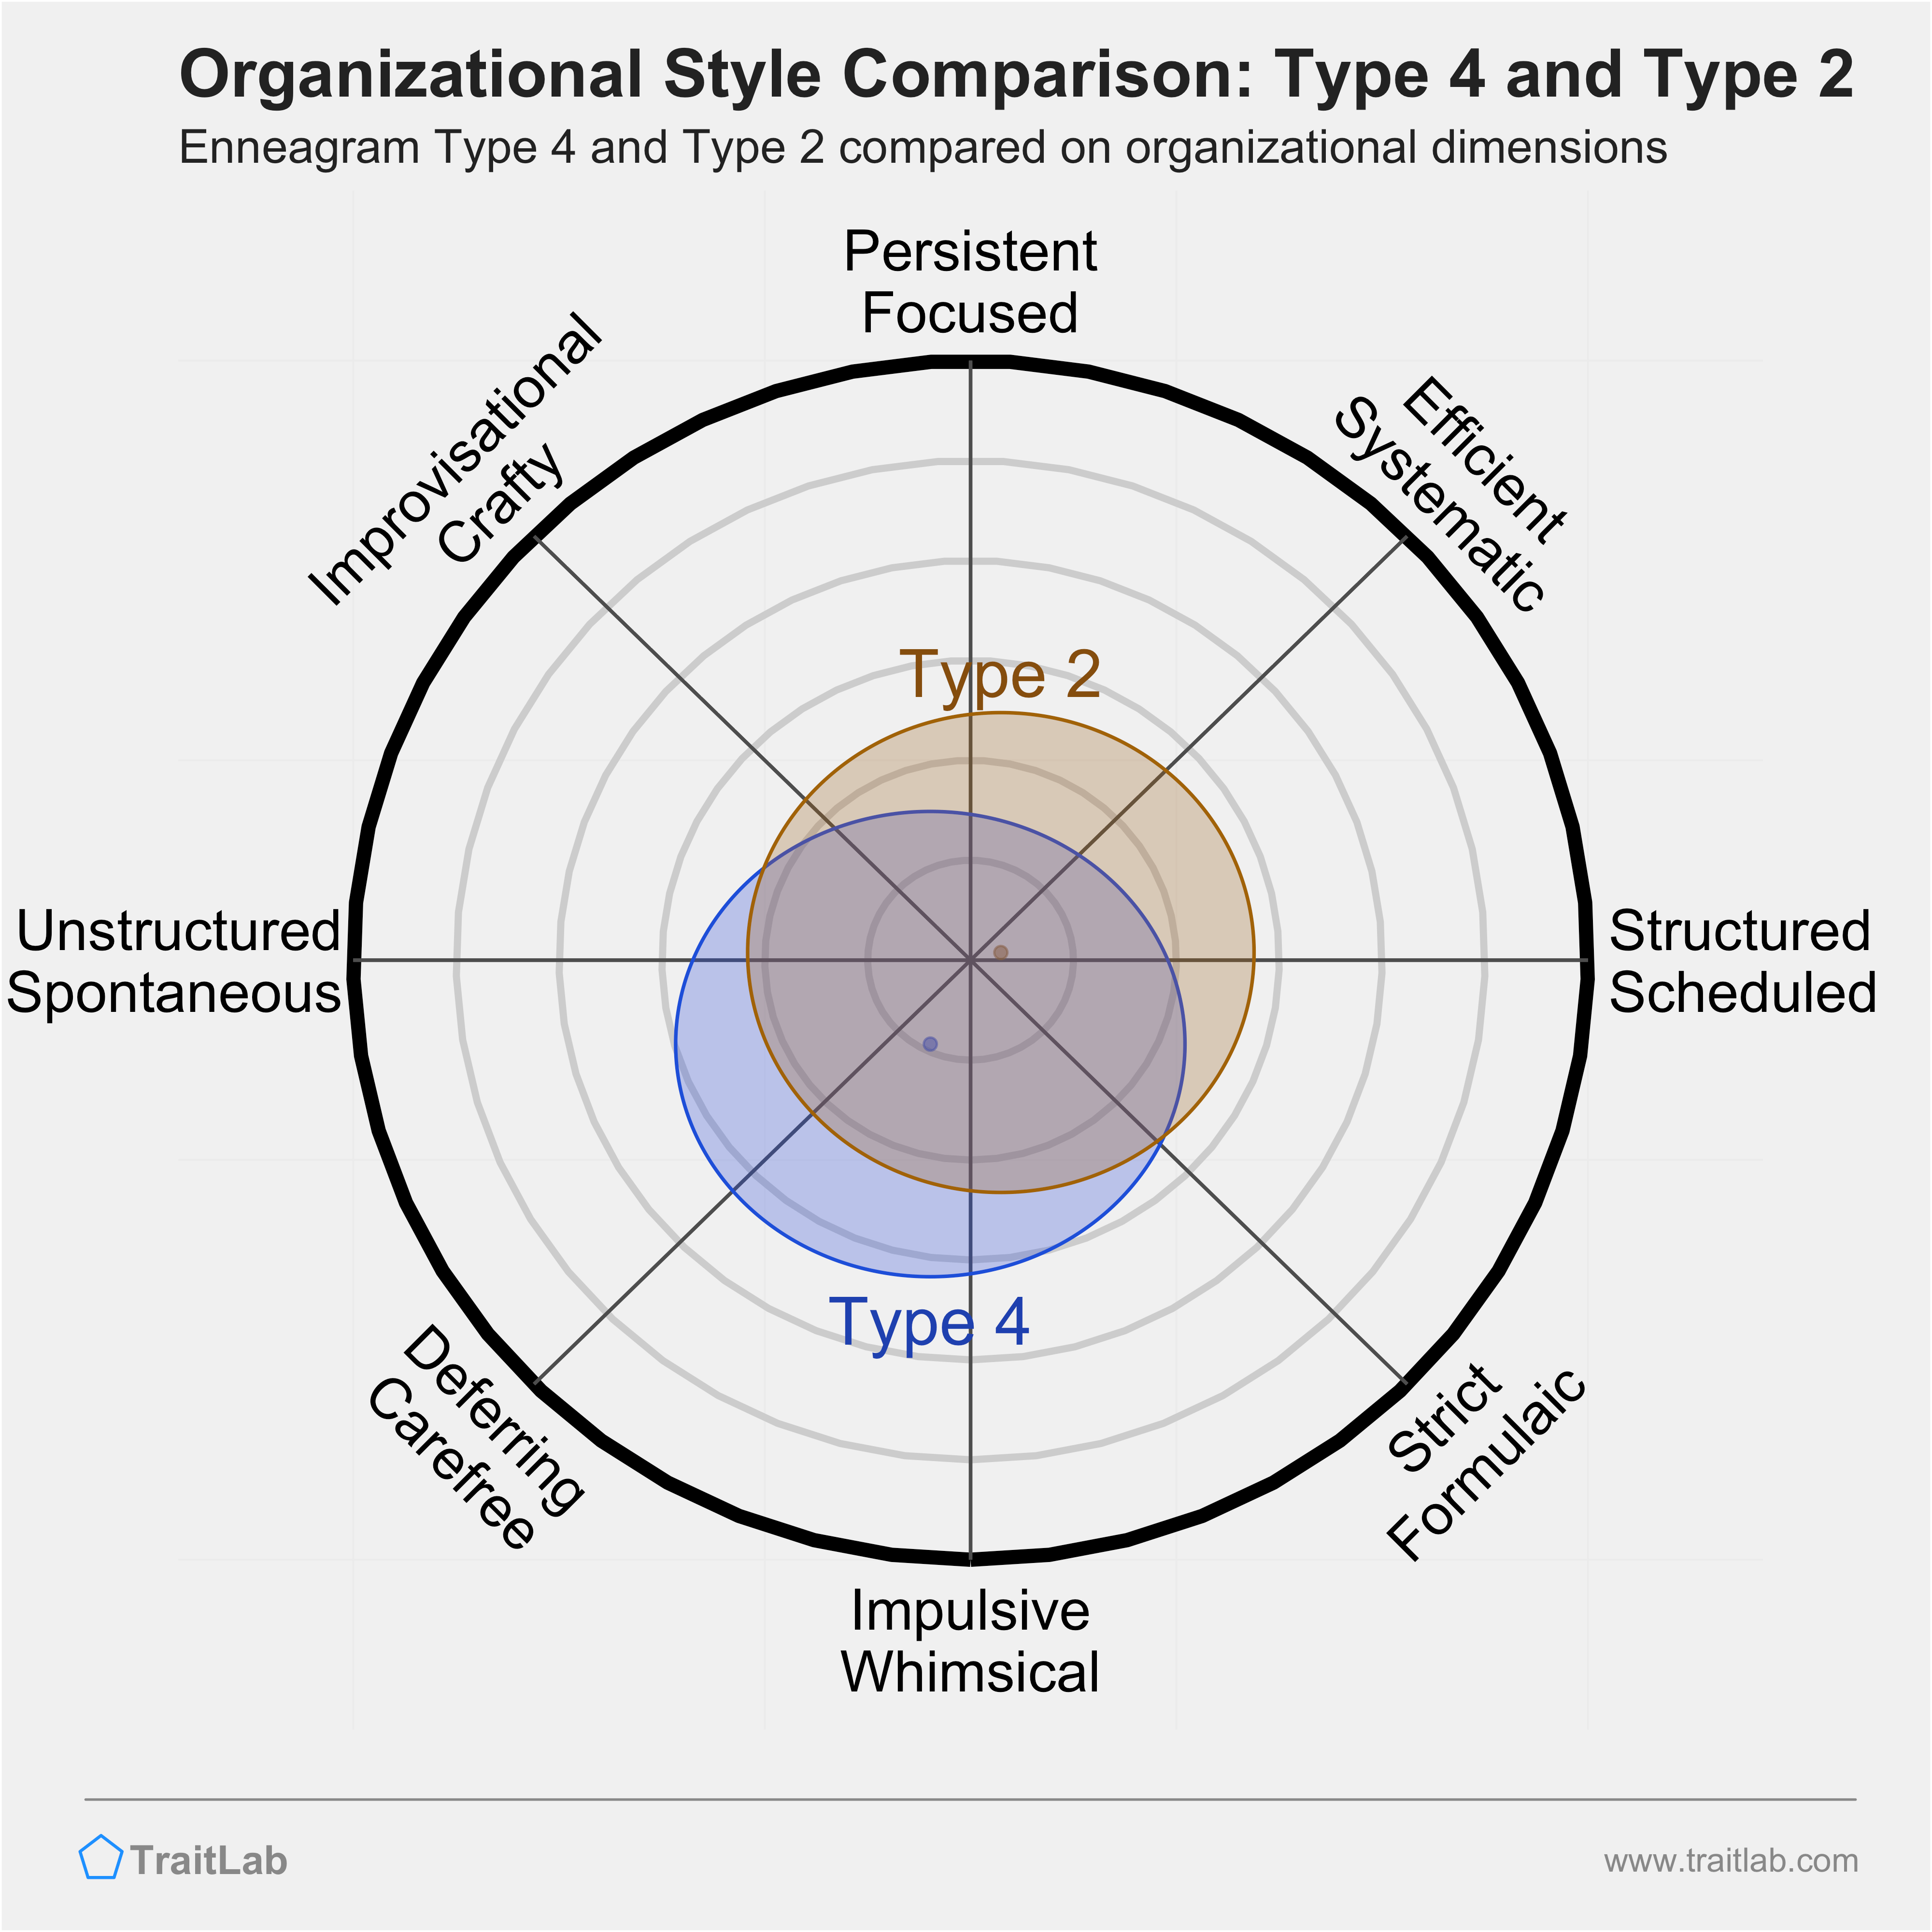 Type 4 and Type 2 comparison across organizational dimensions